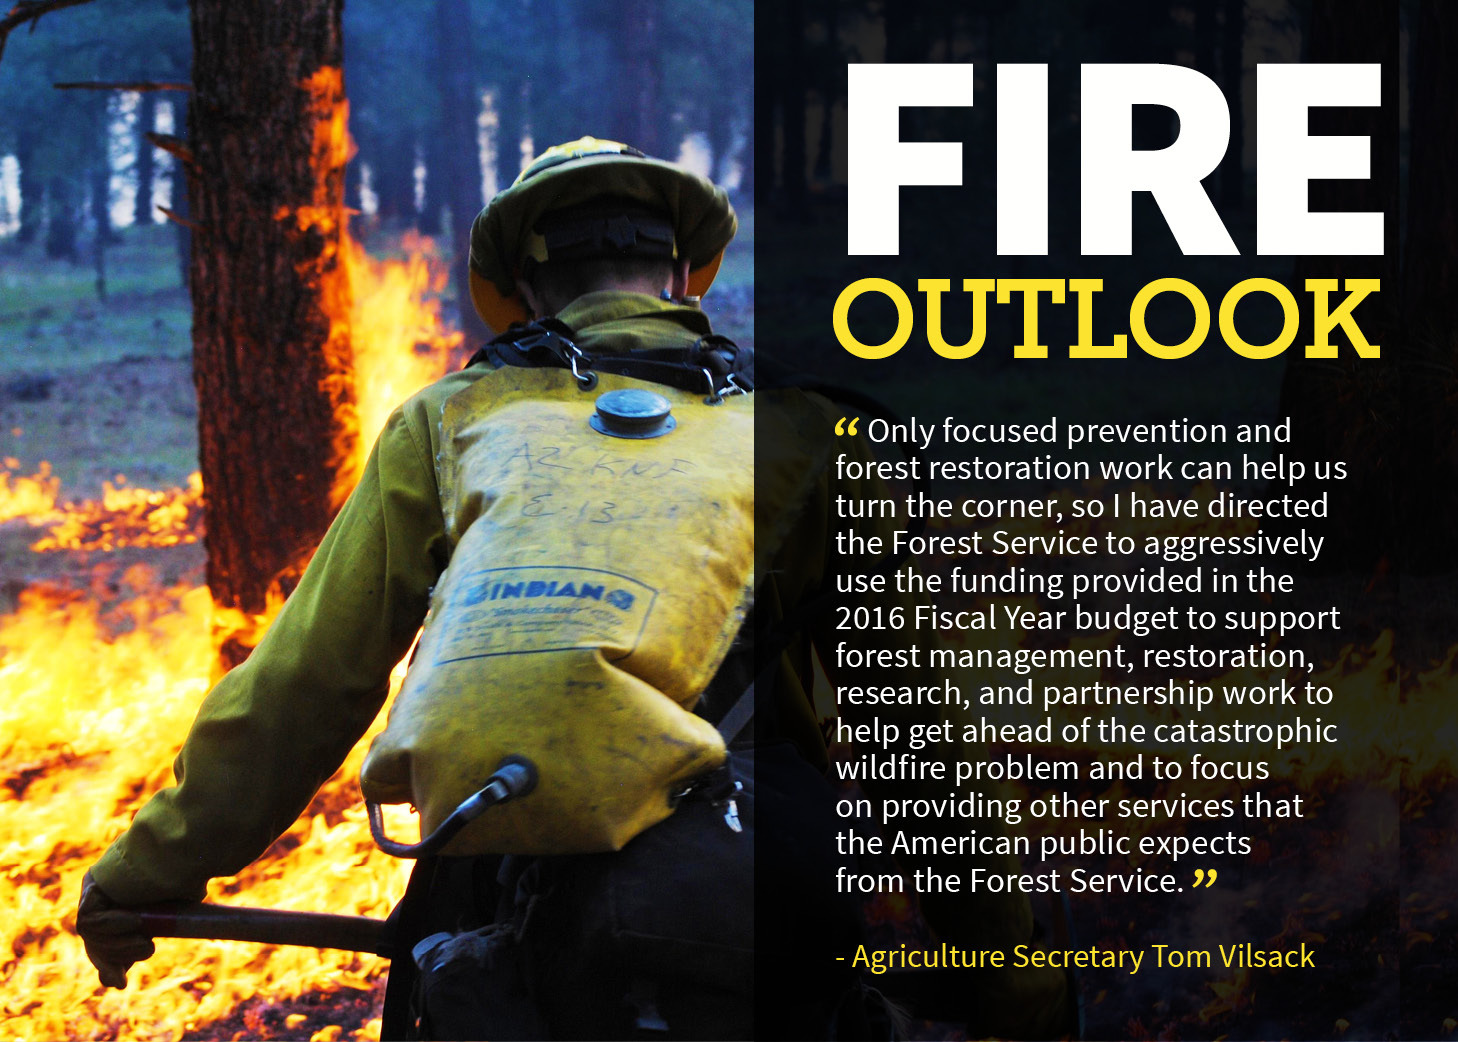 The USDA Forest Service and Partners are gearing up for a significant 2016 wildfire season, underscoring the need to reform wildfire funding: www.usda